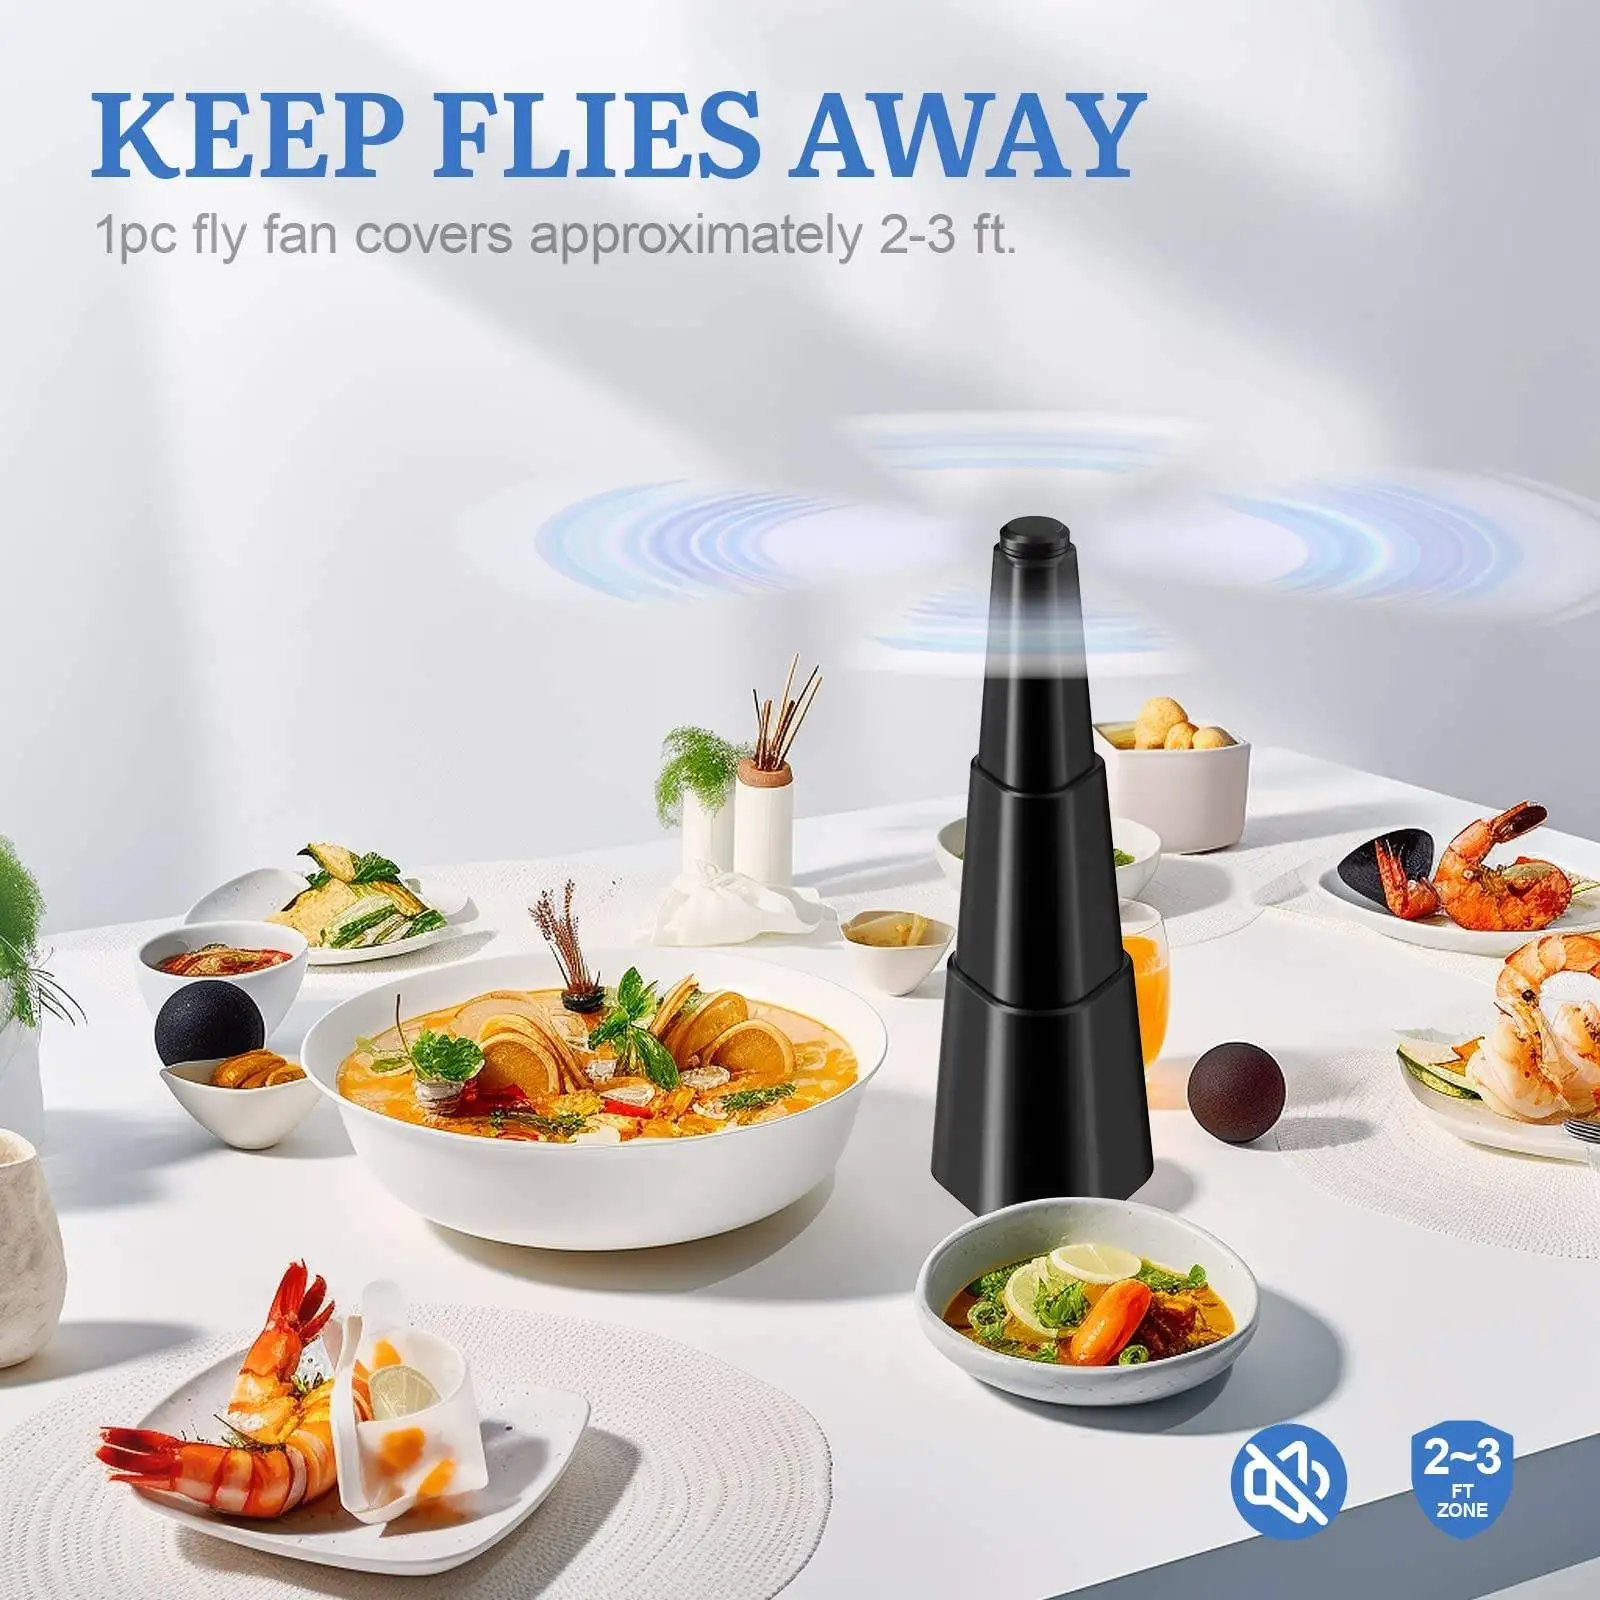 USB Powered Electronic Fly Spinner Table with Holographic Blades Indoor Fly Traps that Keep Flies Away Food Clean for Picnics